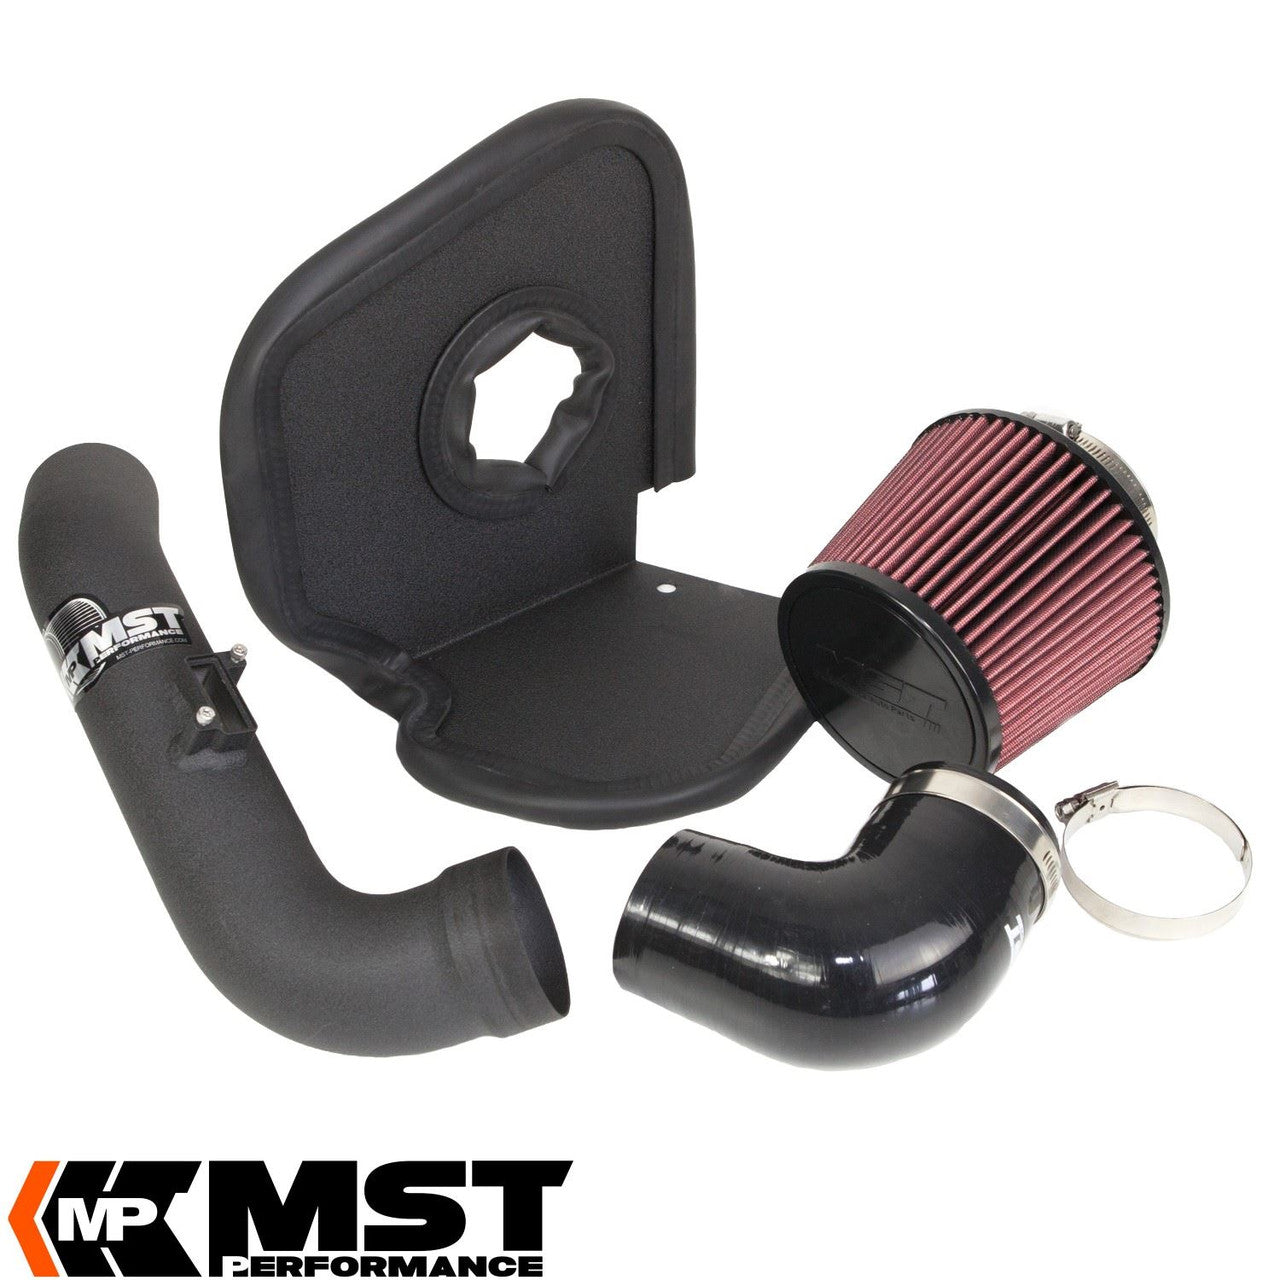 MST Performance Intake & Silicone Hose Kit - Ford Fiesta 1.0 EcoBoost MK7